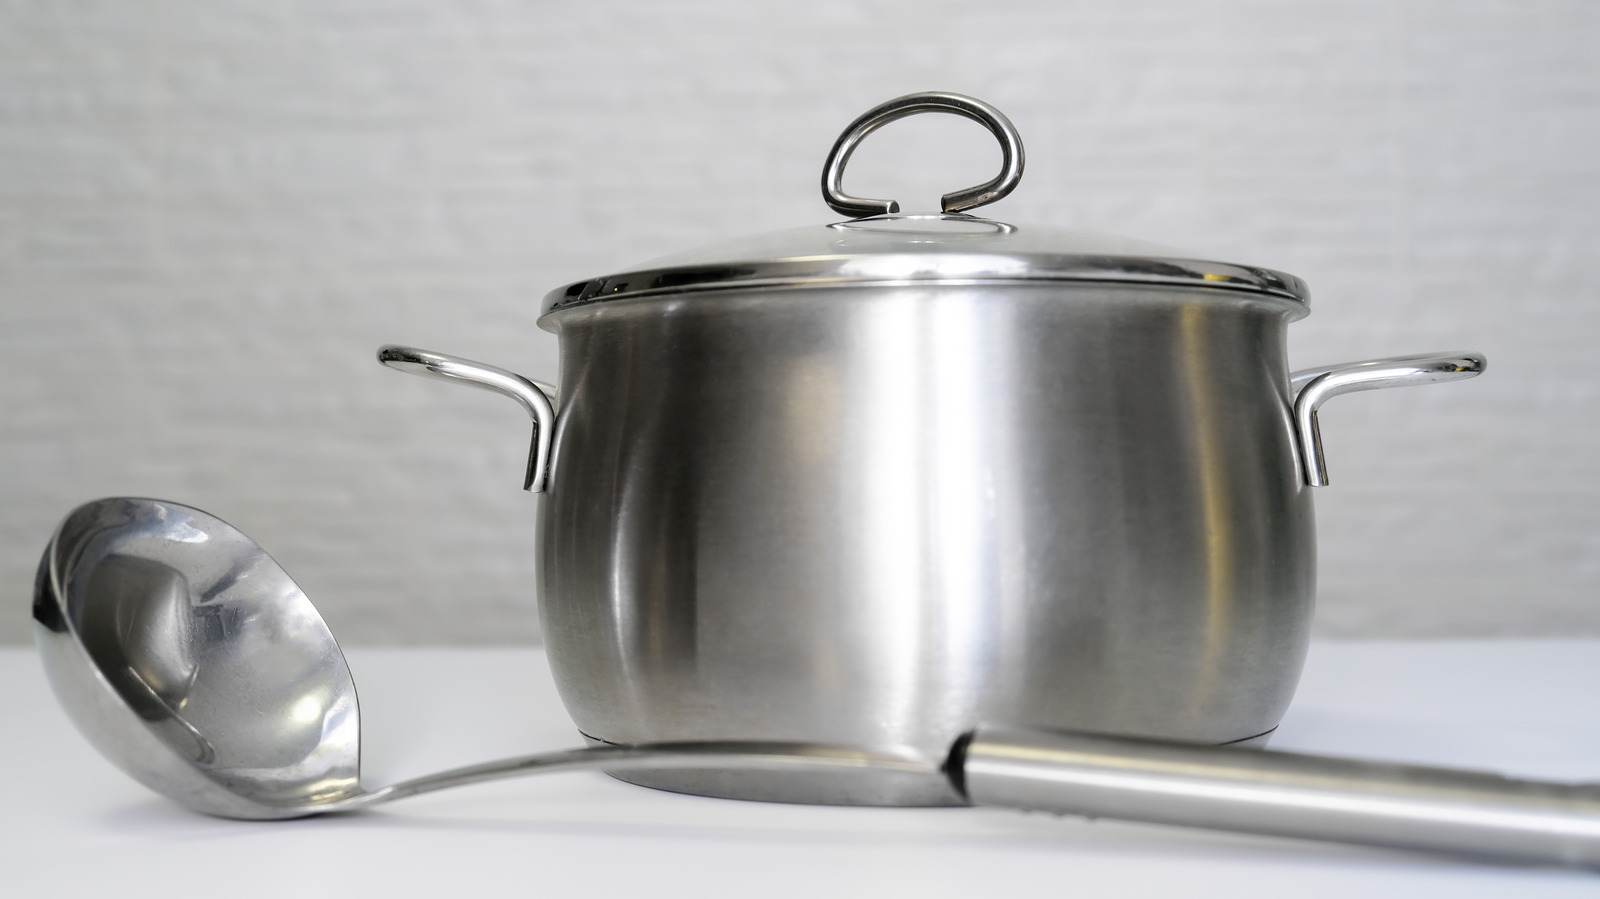 The Absolute Best Uses For Your Stockpot - Tasting Table